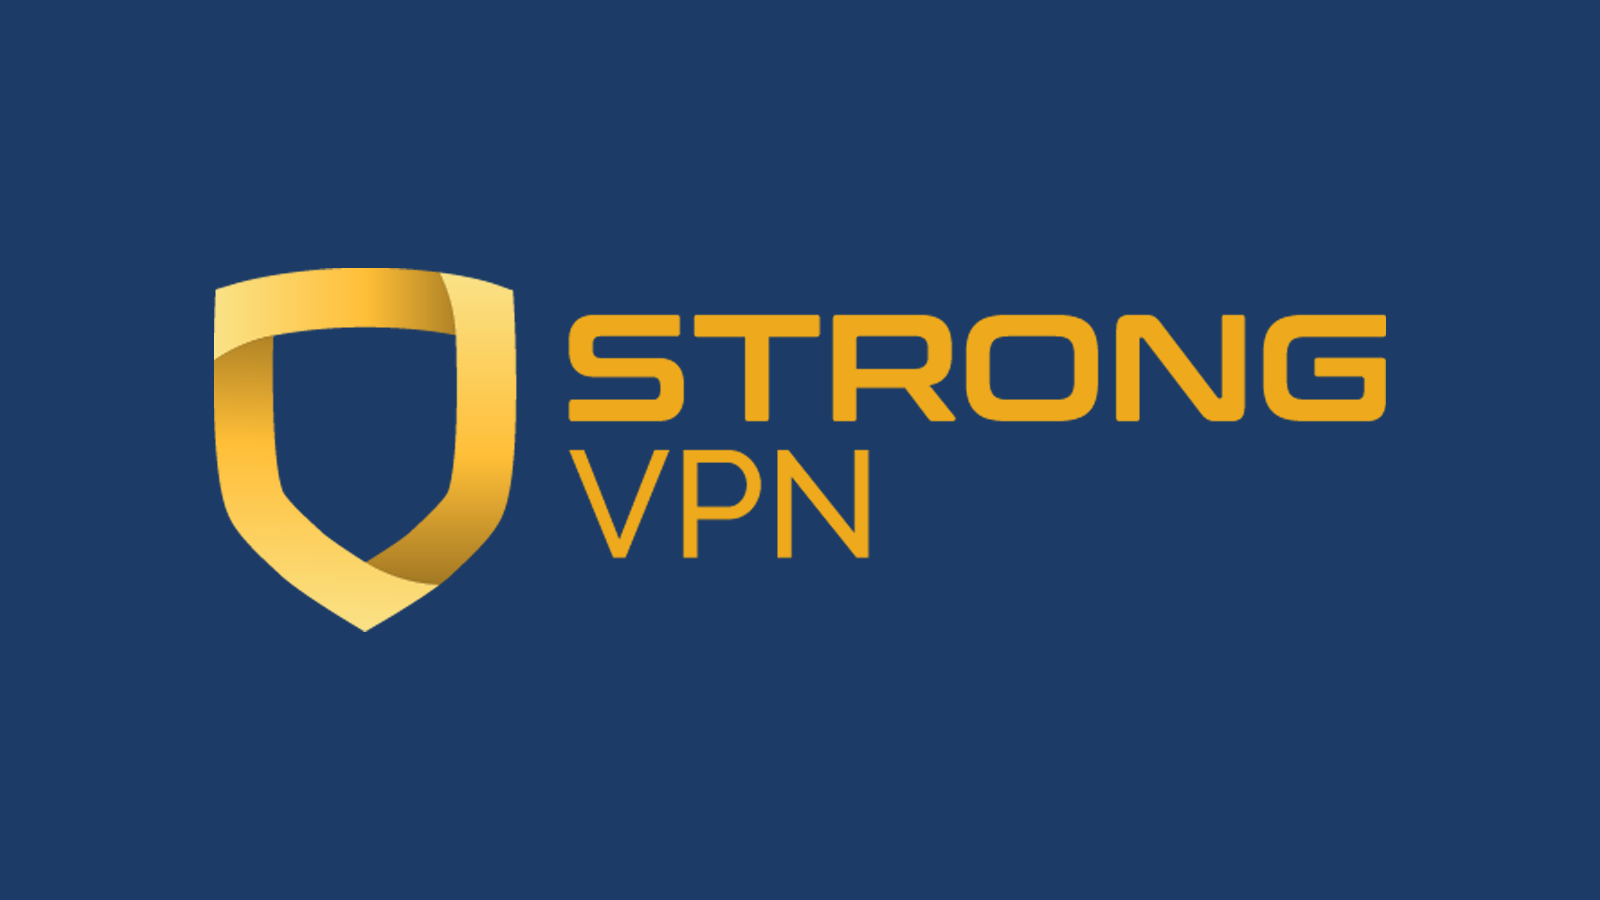 StrongVPN company name and logo against dark background